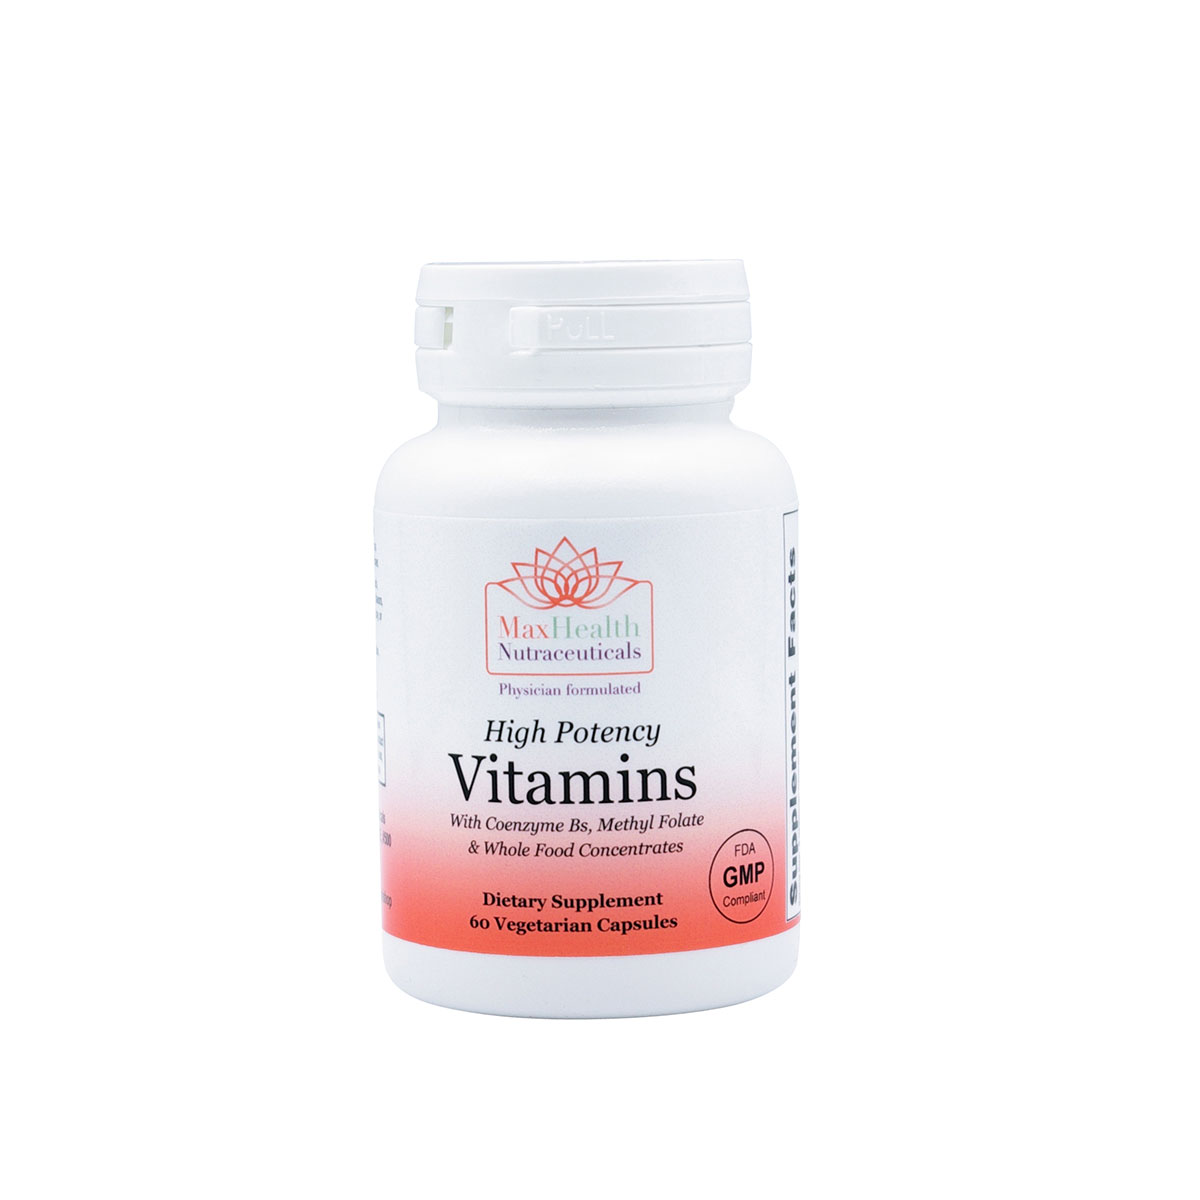 11High Potency Vitamins with Coenzyme Bs, Methyl Folate, and Whole Food Concentrates 60 Capsules